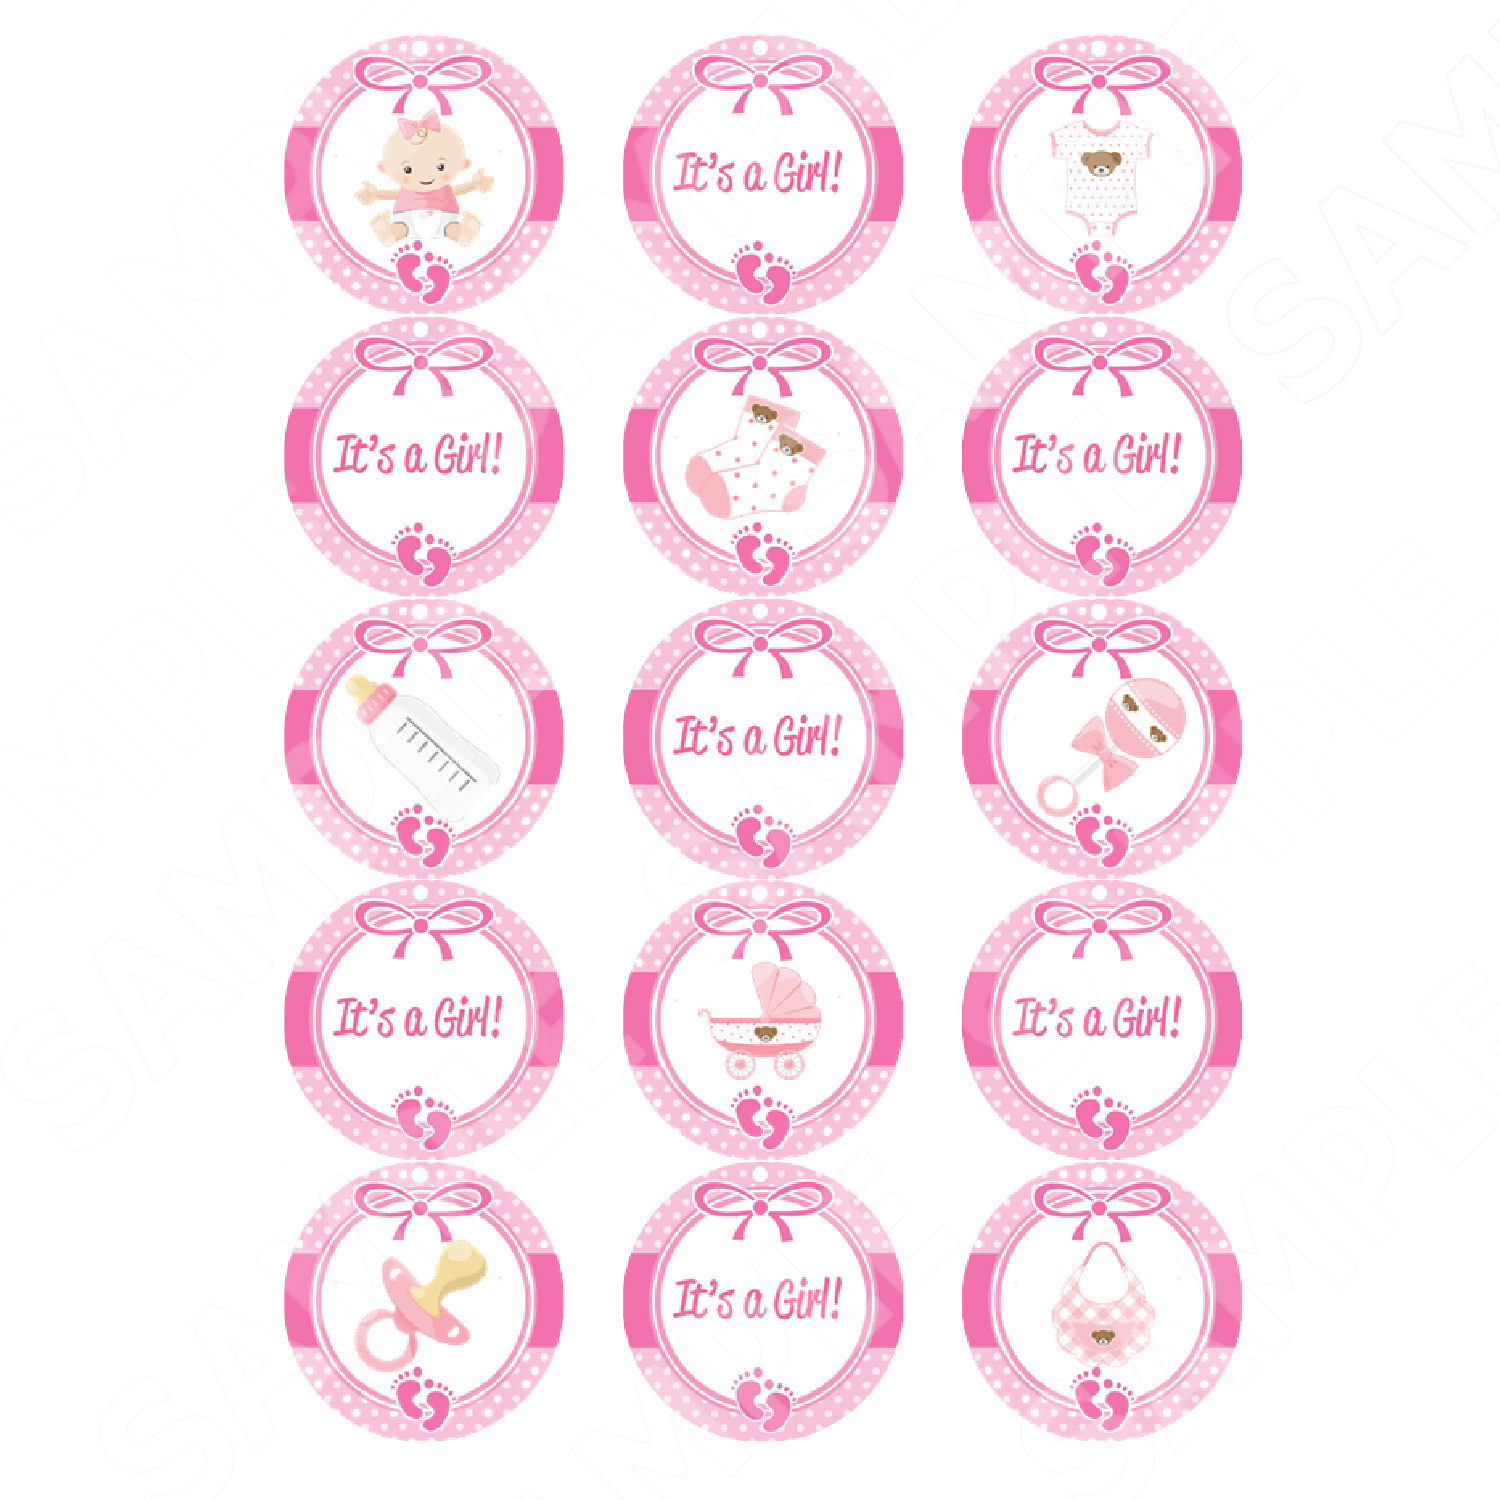 15 Baptism Girl edible cupcake toppers 8 choices PERSONALISED 2 sizes precut 